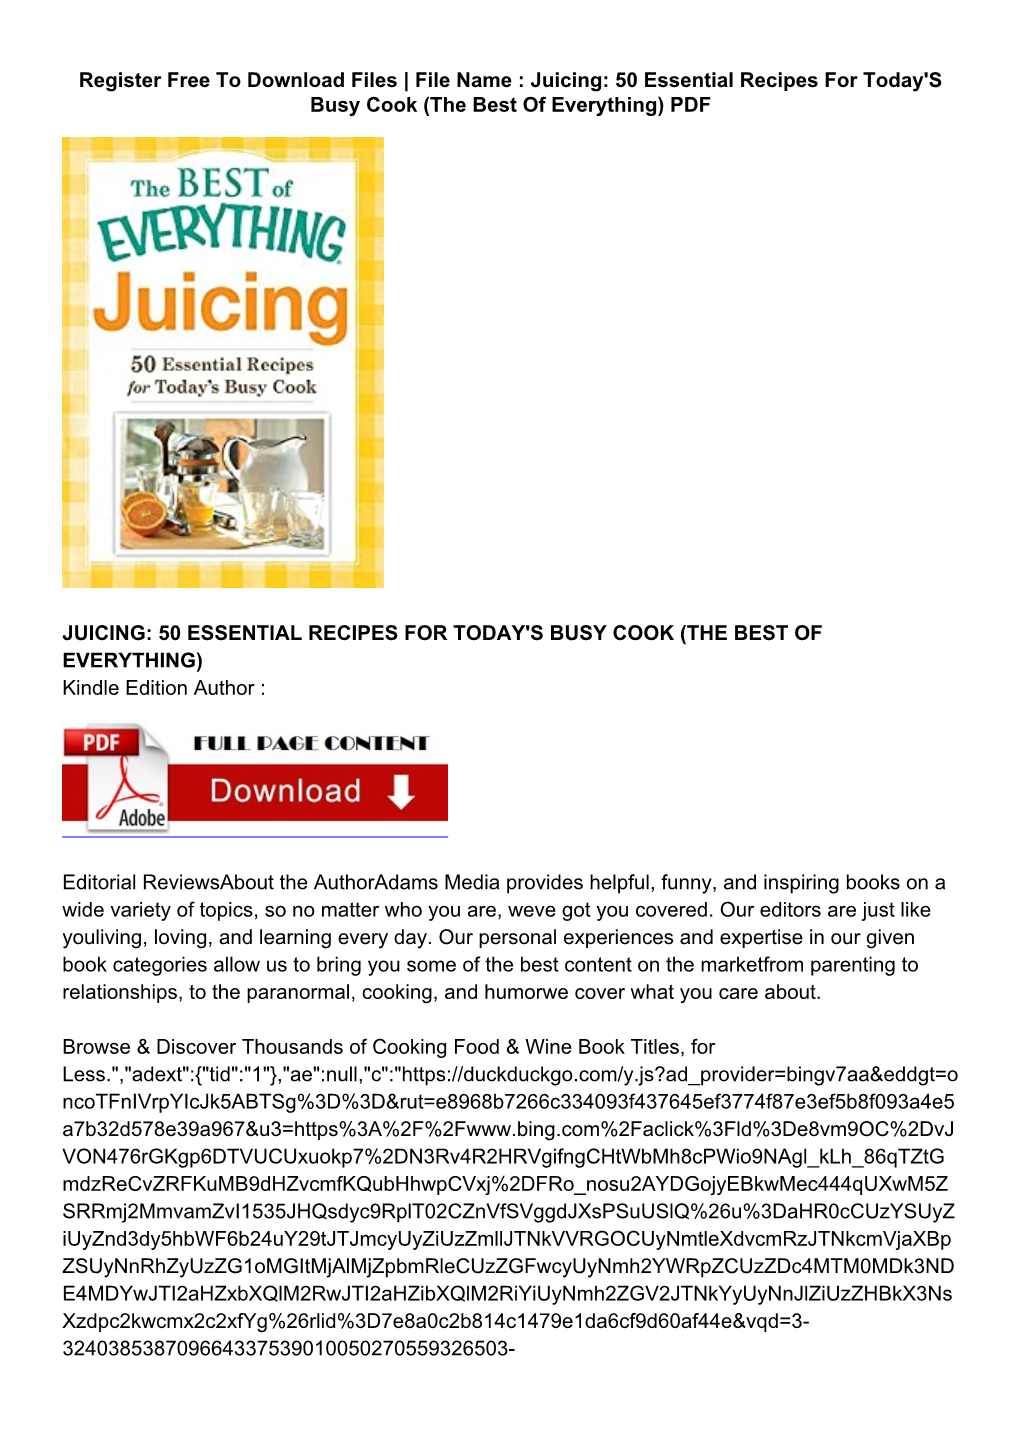 [PDF] Juicing: 50 Essential Recipes for Today's Busy